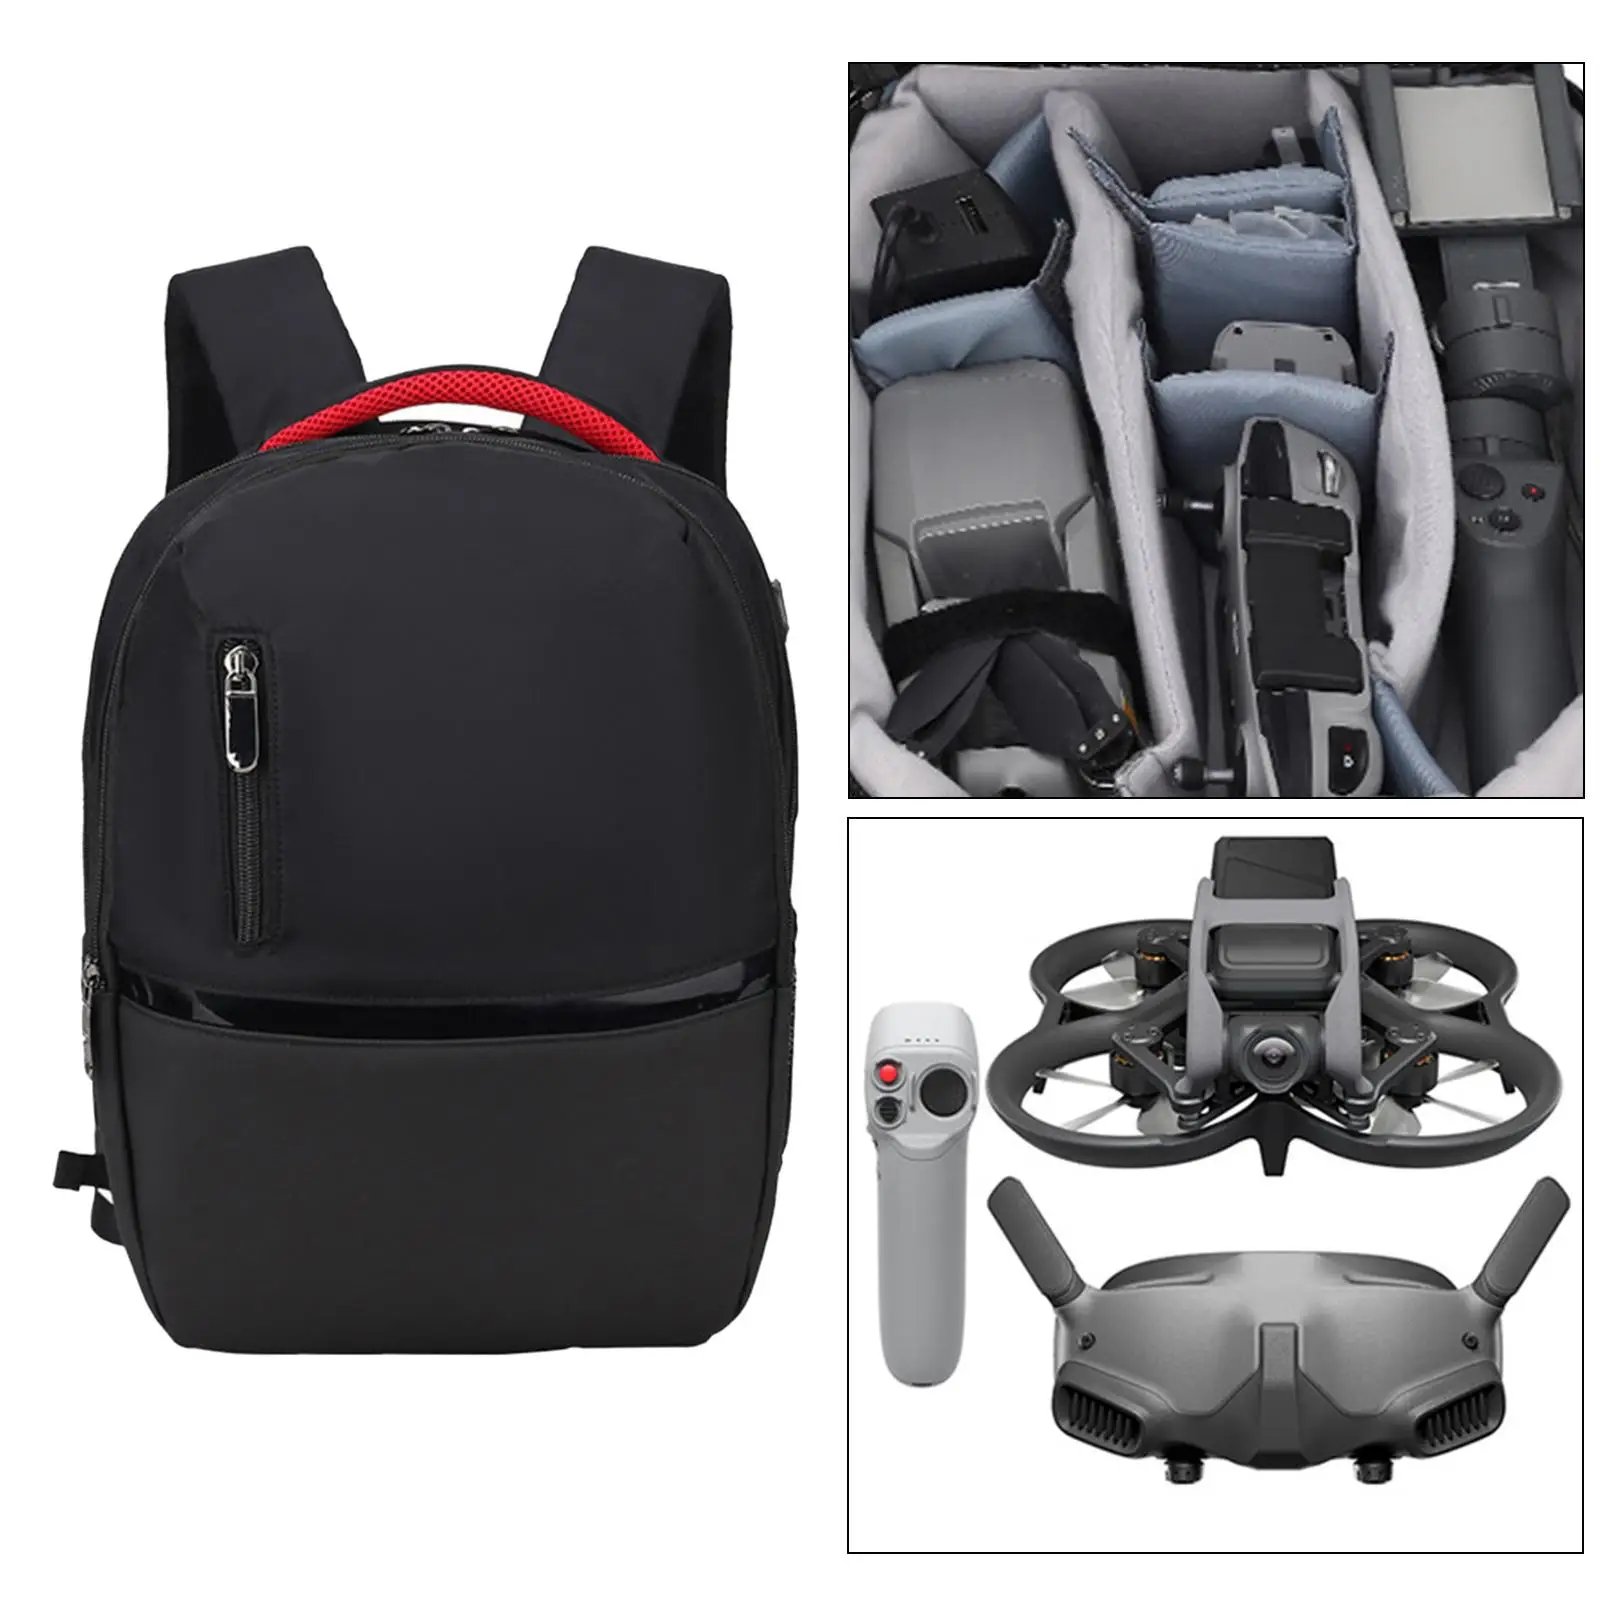 Travel Drone Carrying Handbag Large Capacity Suitcaseg Waterproof Travel Bag Multifunction Drone Backpack for Drone Accessories